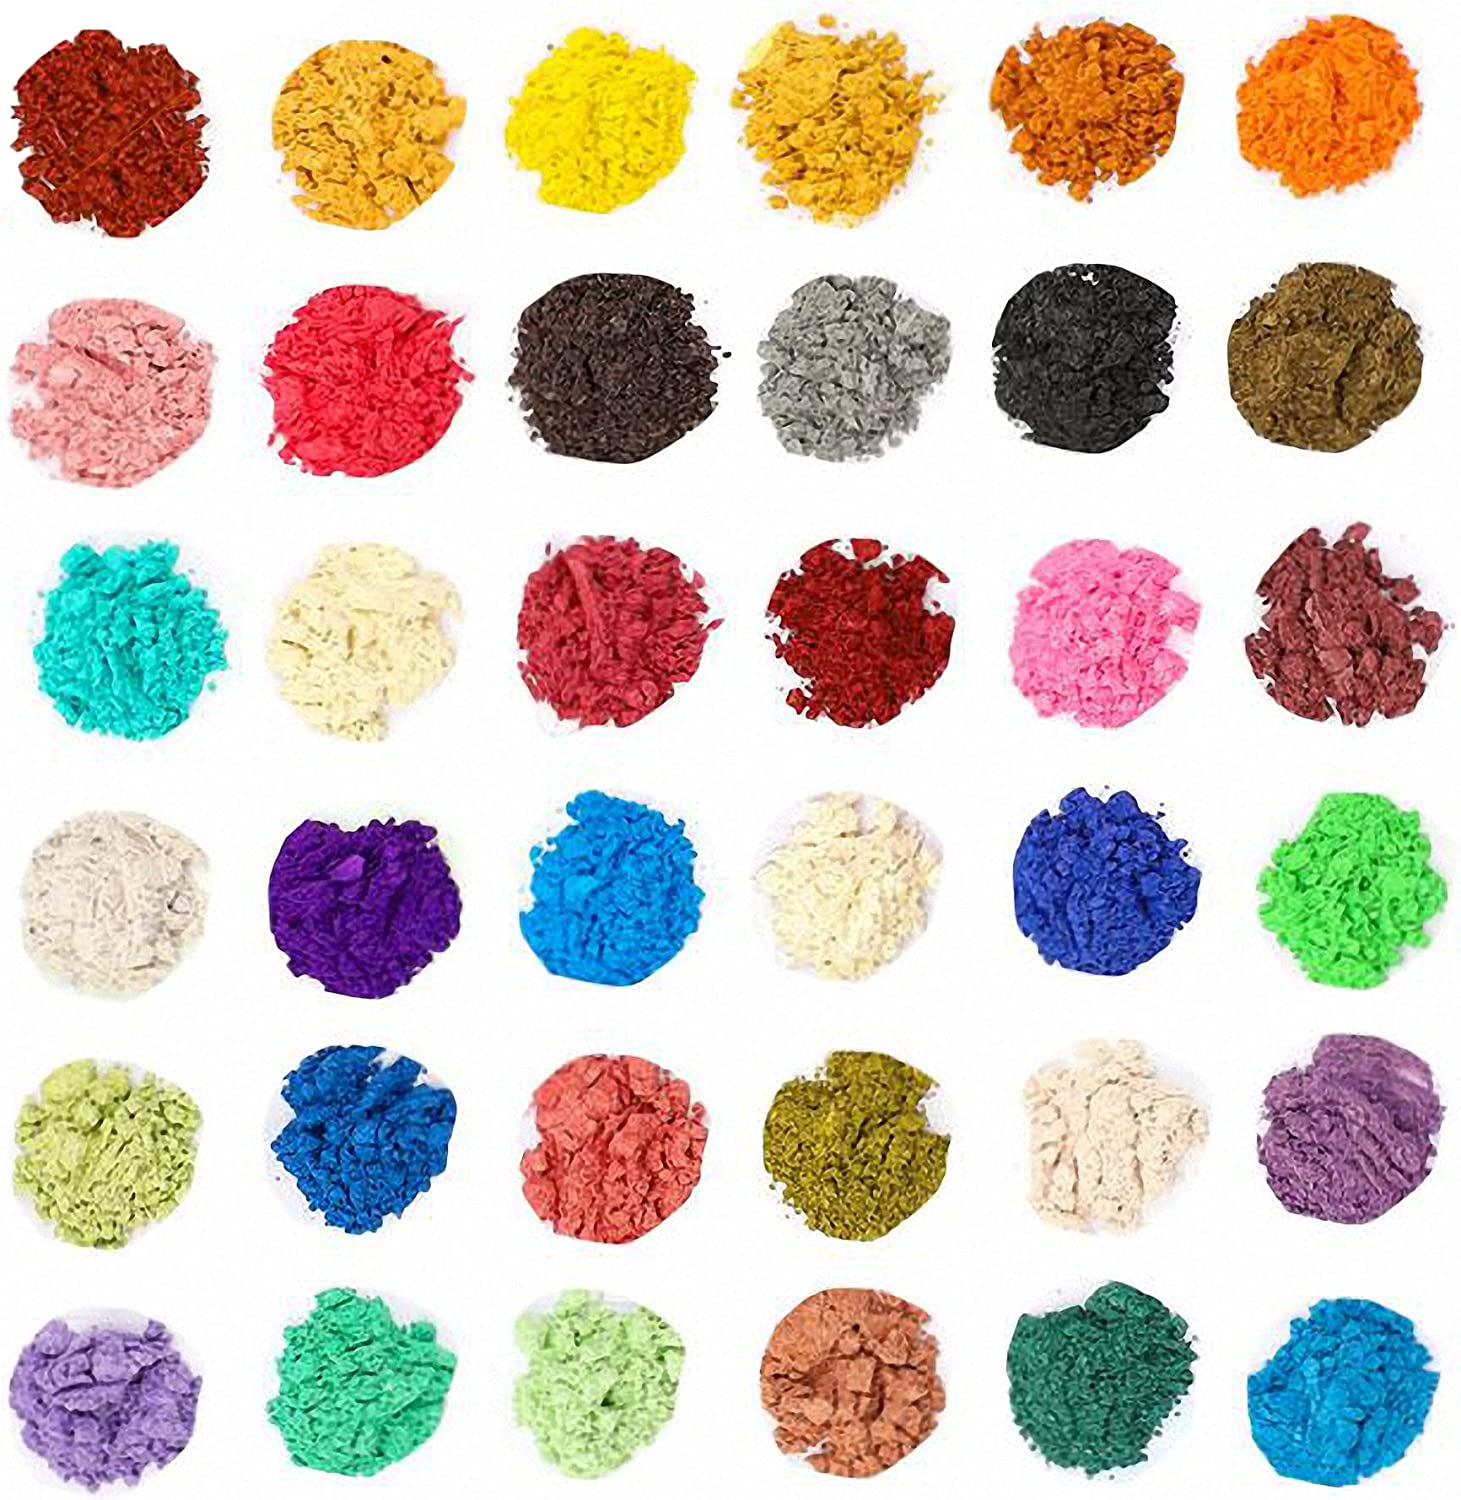 Mica Powder Epoxy Resin 15 Colors Shimmery Pigment Natural Soap Making Lip  Gloss